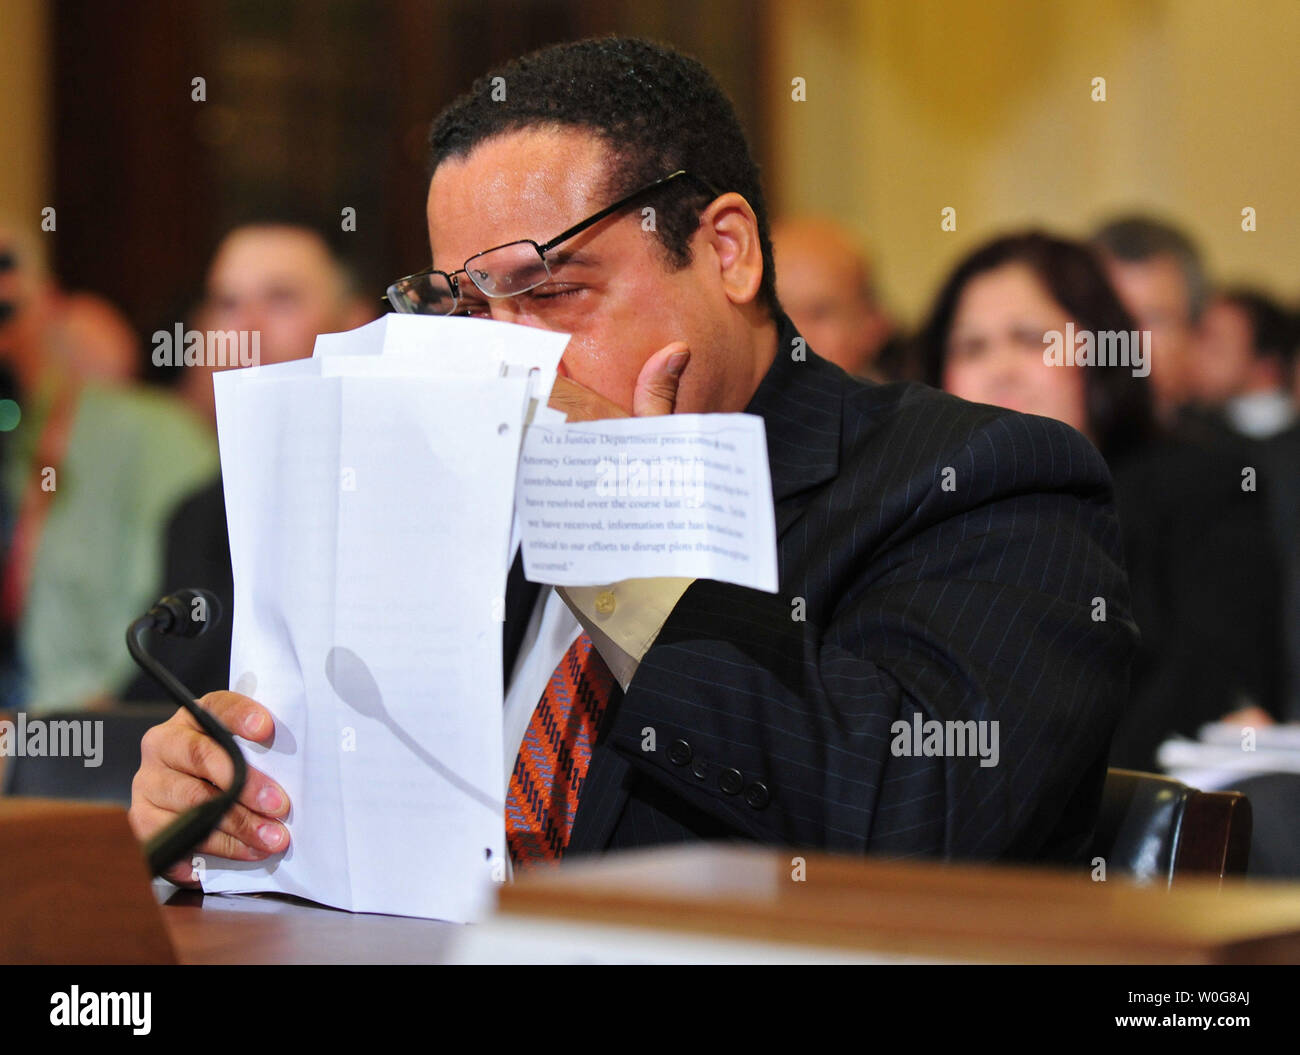 Rep. Keith Ellison (D-Minn) becomes emotional as he testifies during a House Homeland Security Committee hearing on the extent of radicalization in the American Muslim community and the community's response, on Capitol Hill in Washington on March 10, 2011.  UPI/Kevin Dietsch Stock Photo